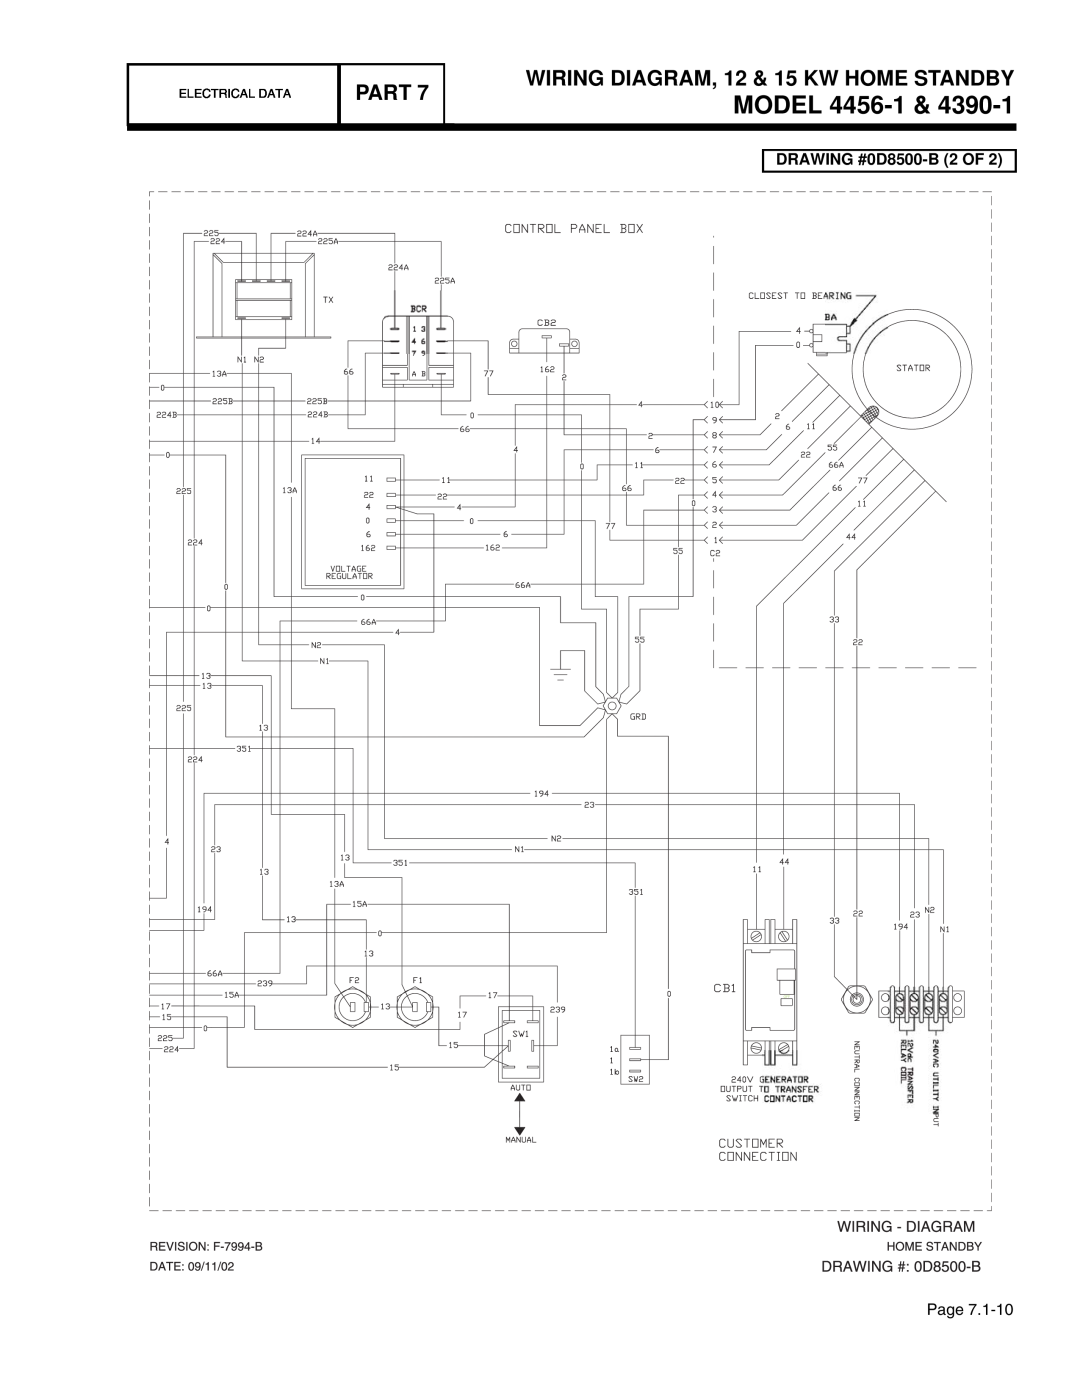 Guardian Technologies 4389, 4390, 4760 MODEL 4456-1, Part, WIRING DIAGRAM, 12 & 15 KW HOME STANDBY, DRAWING #0D8500-B 2 OF 